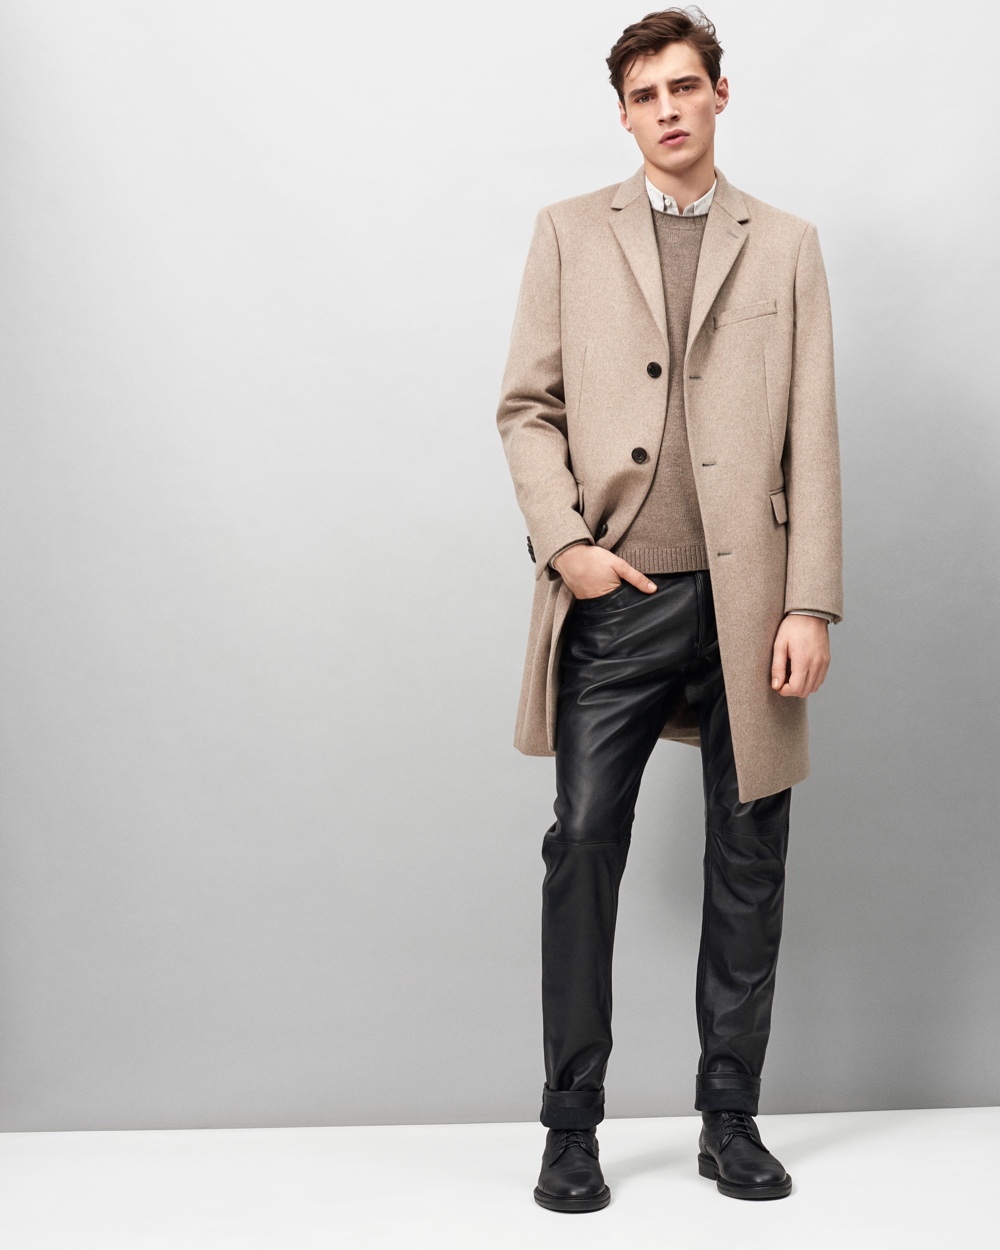 Adrien Sahores Models Theory's Fall/Winter 2015 Collection of Men's Essentials